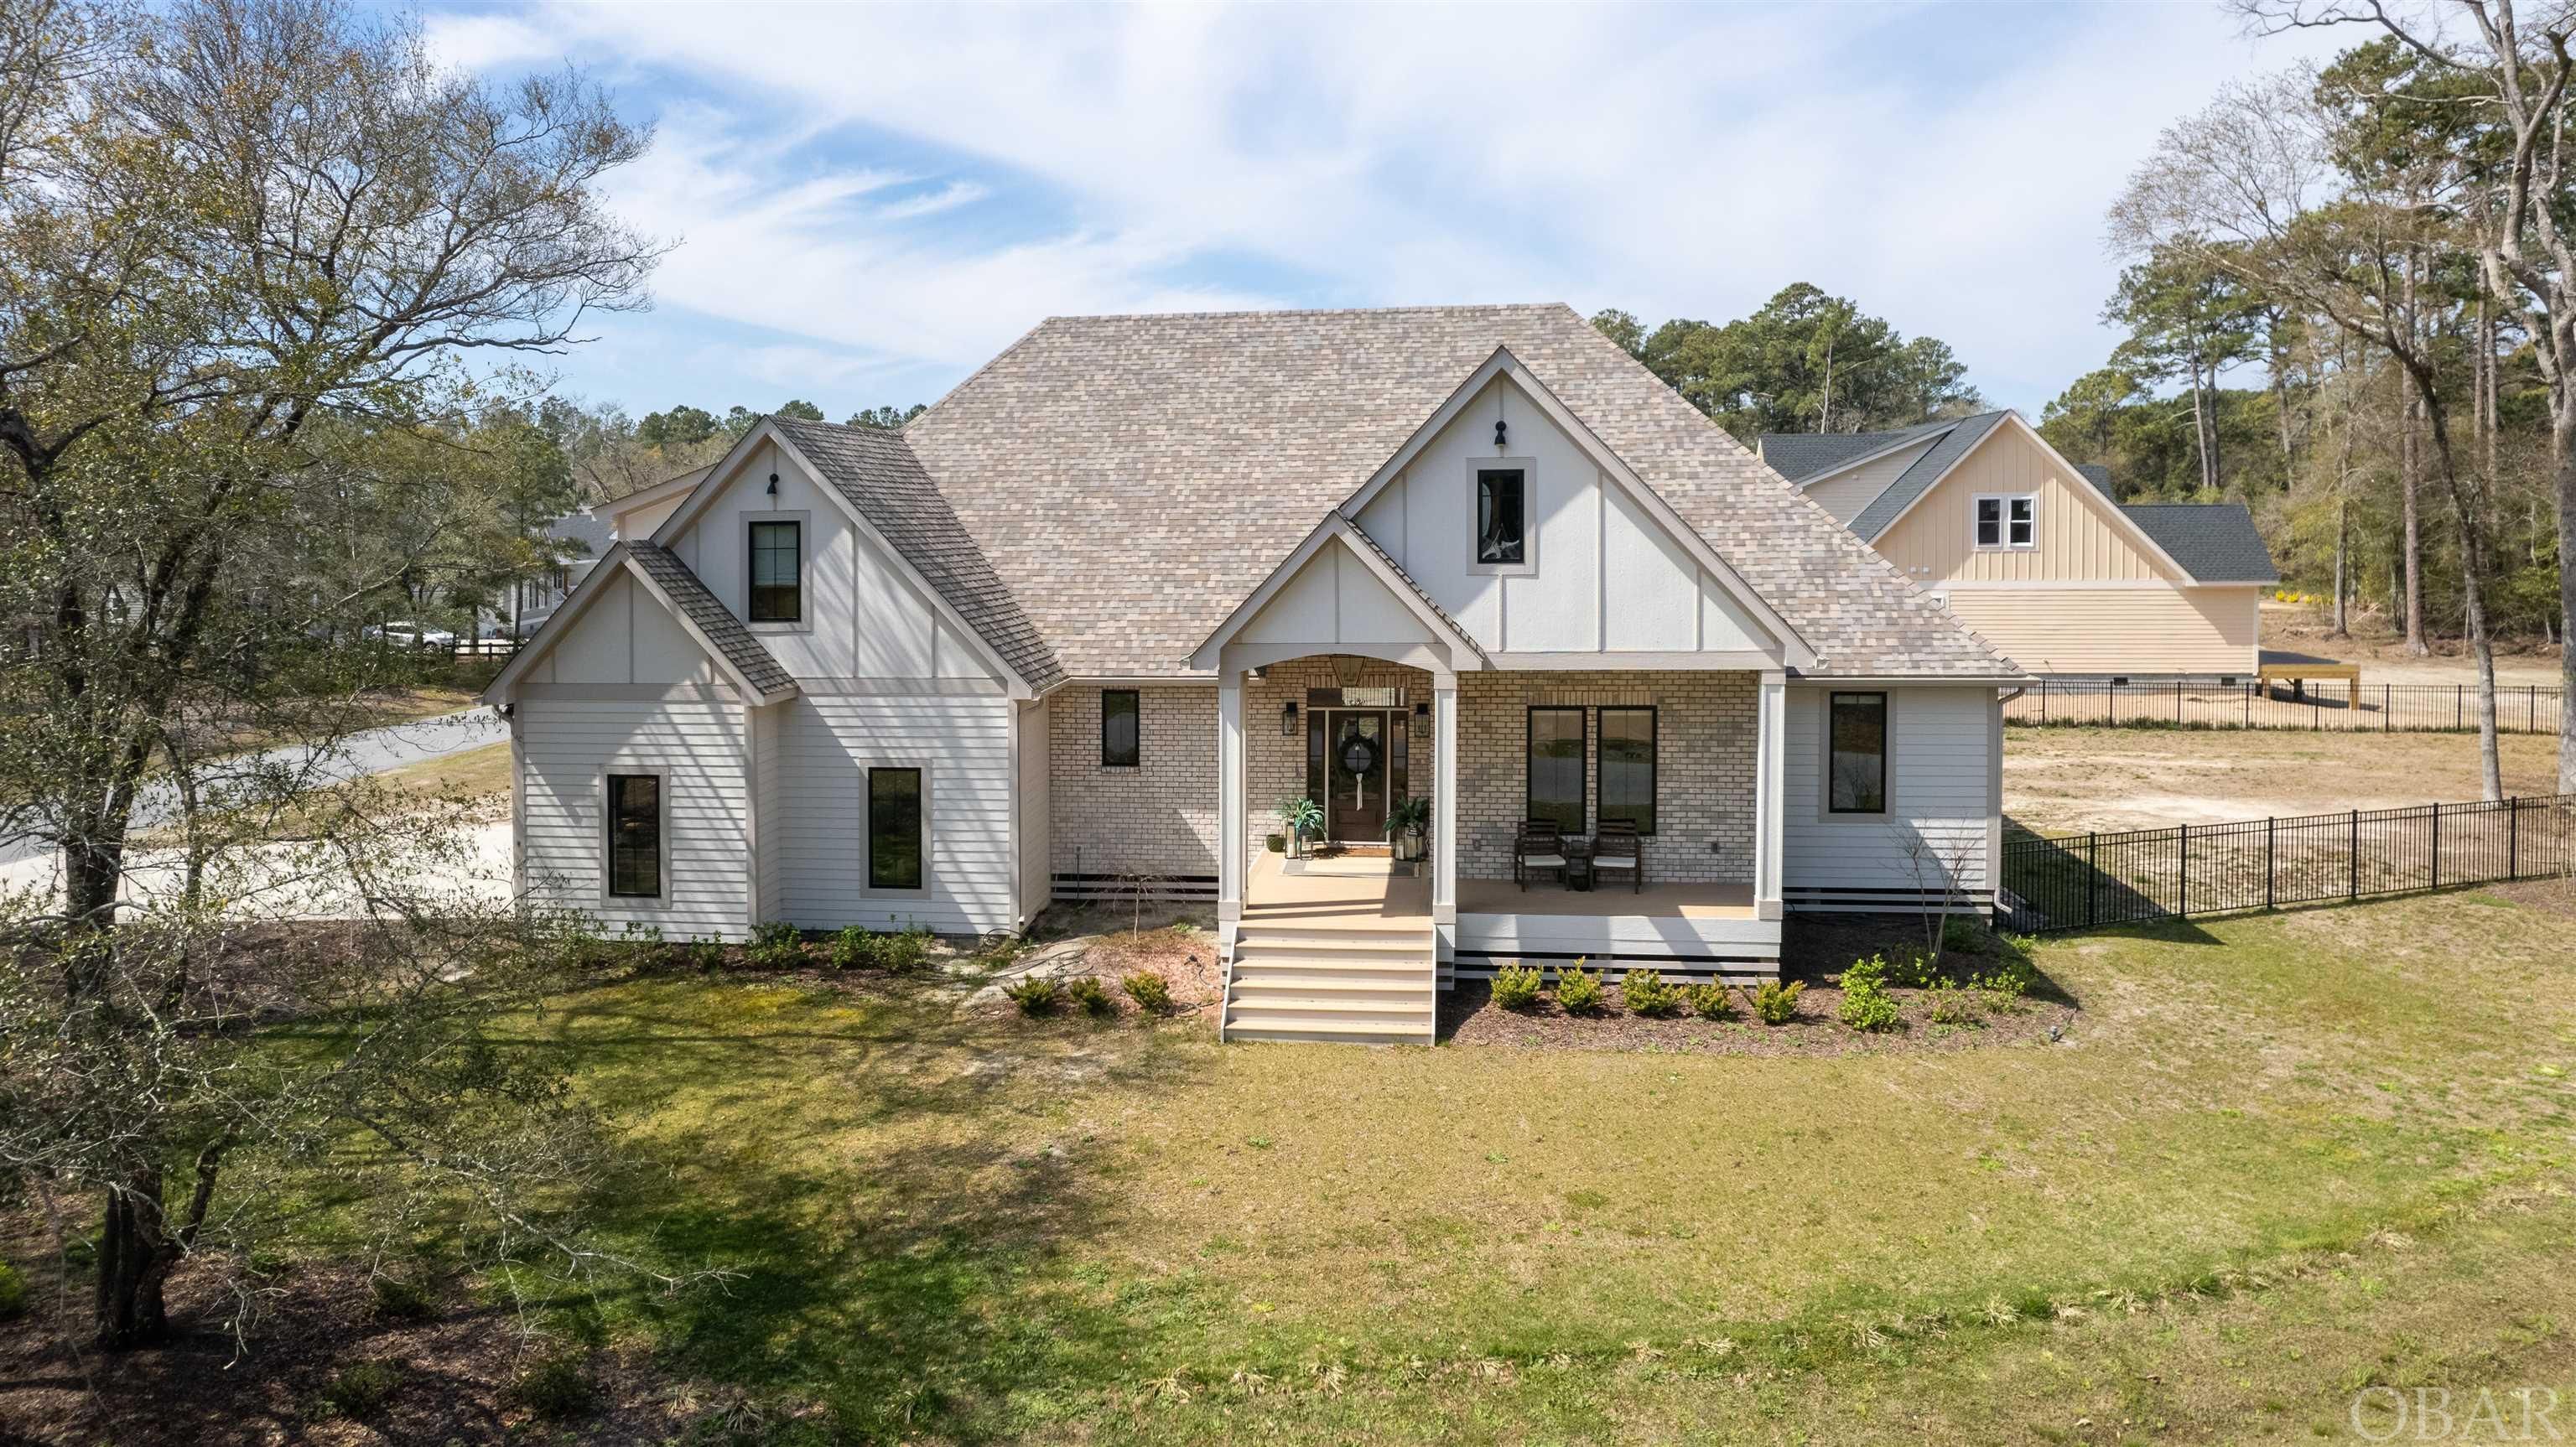 105 Chicora Ct, Manteo, NC 27954-8030, 5 Bedrooms Bedrooms, ,4 BathroomsBathrooms,Residential,For sale,Chicora Ct,125322